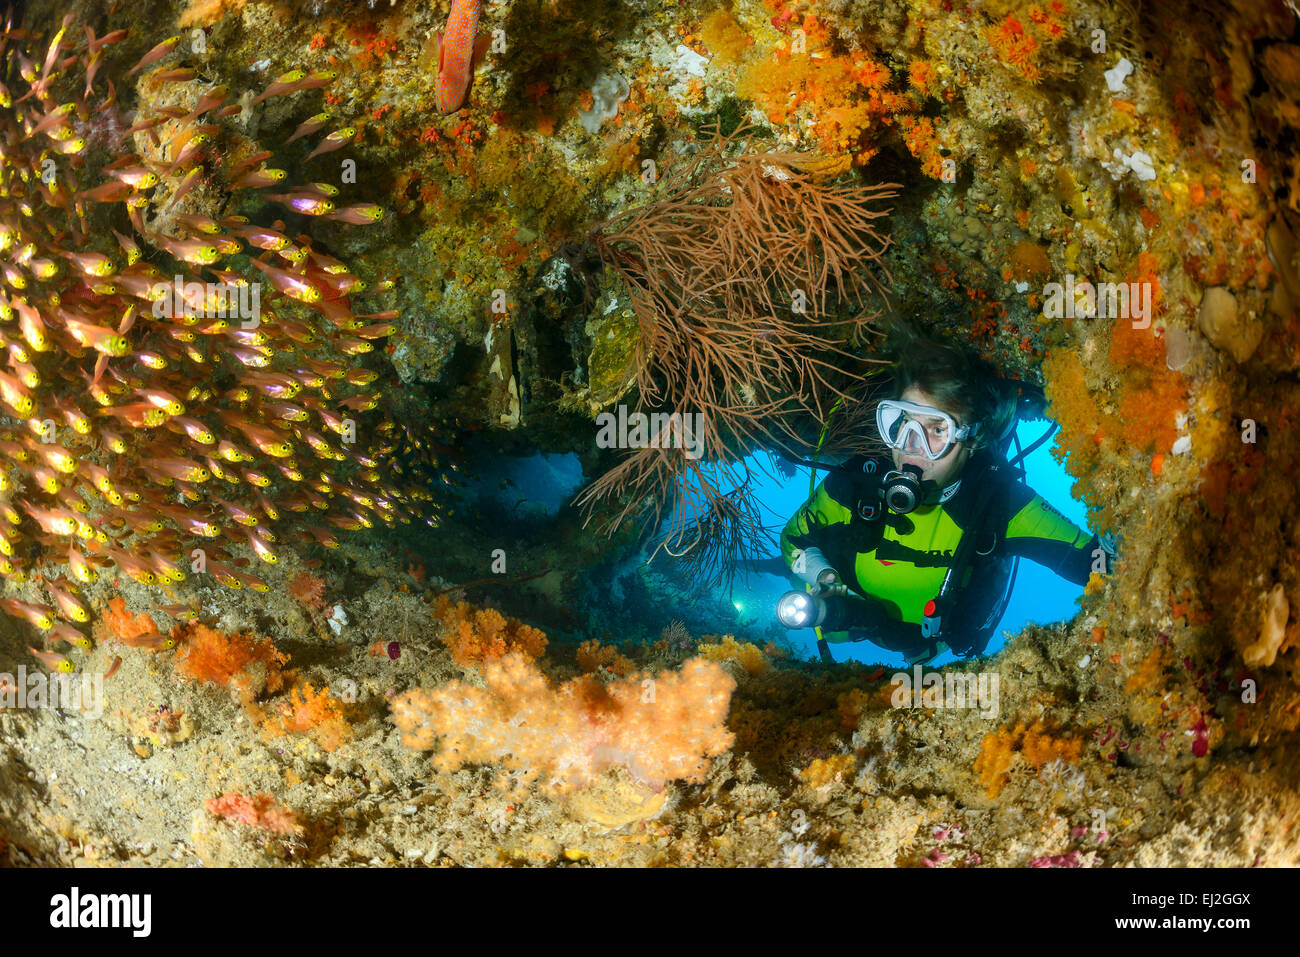 Parapriacanthus ransonneti, Pygmy Sweeper and scuba diver, Baa Atoll, Maldives, Indian Ocean Stock Photo